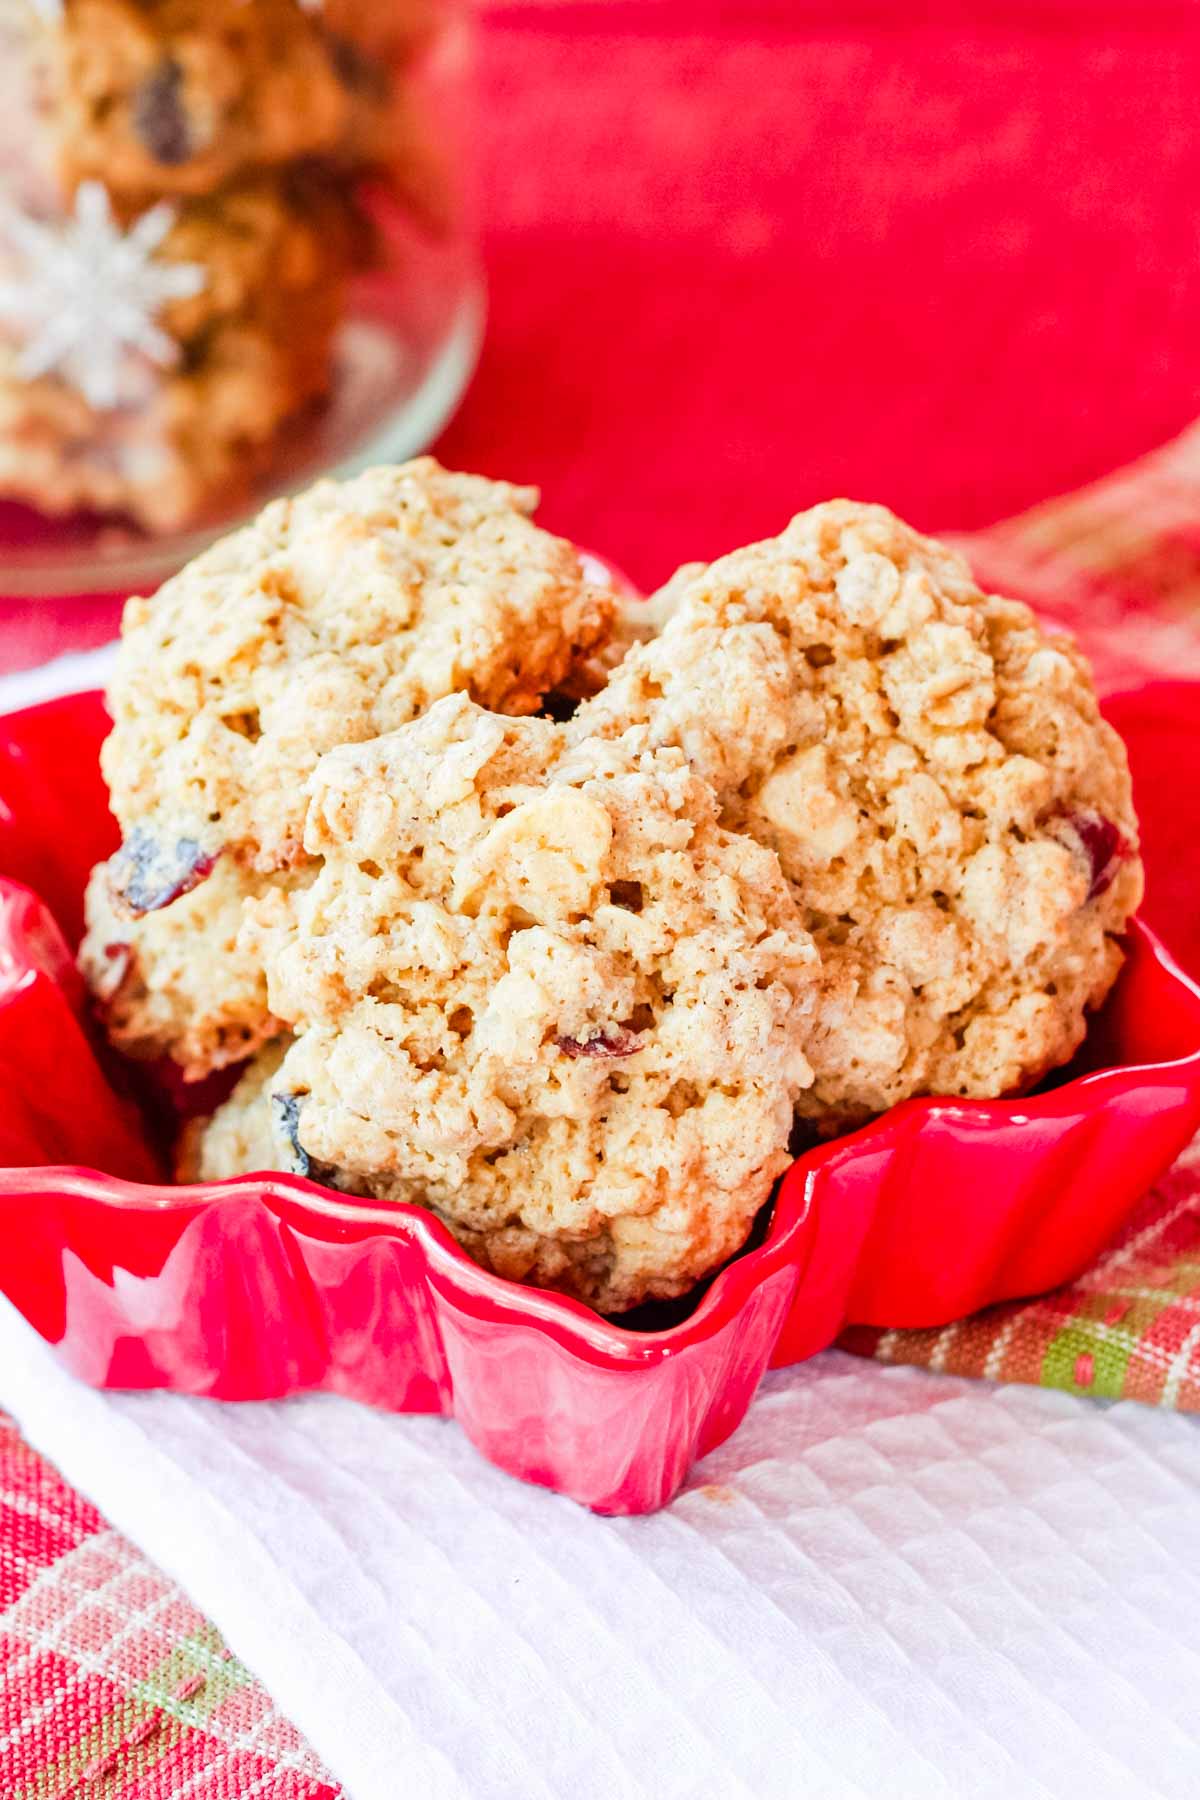 Gluten Free Oatmeal Cookies tied in a red snowflake-shaped dish on top of stacked white and plaid cloth napkins.